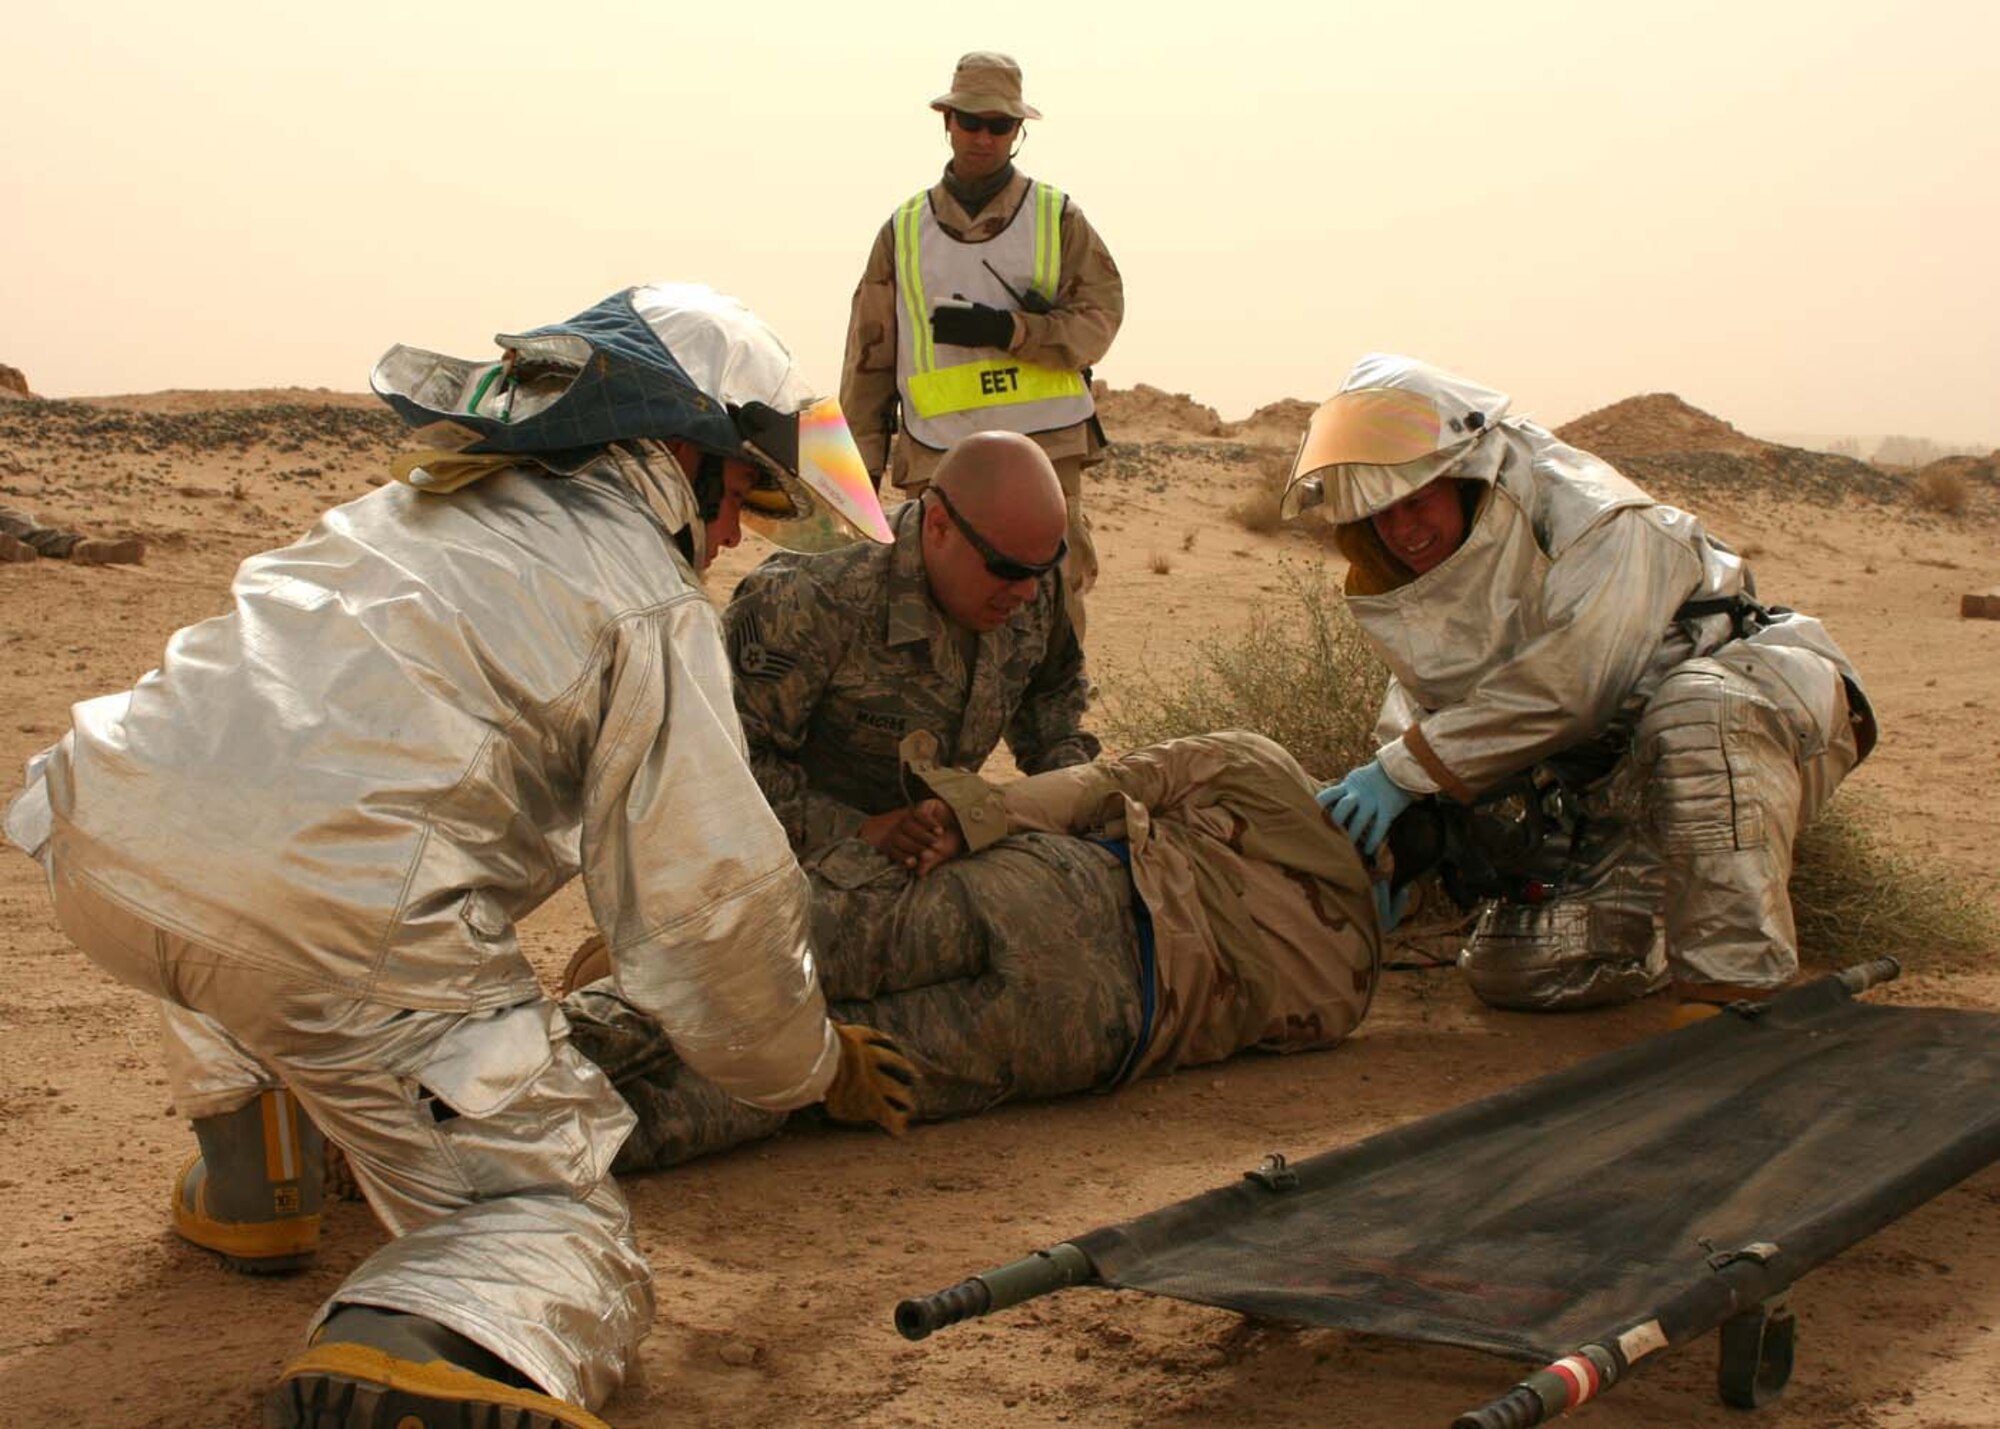 SOUTHWEST ASIA -- Members from the 386th Expeditionary Civil Engineering Squadron and the 386th Expeditionary Security Forces Squadron work together to move a mock victim onto a litter while being inspected during an exercise at an air base in Southwest Asia, Feb. 23. The exercise was an evaluation of multi-agency response to a mass casualty incident. (U.S. Air Force photo/ Staff Sgt. Shaun Denton)